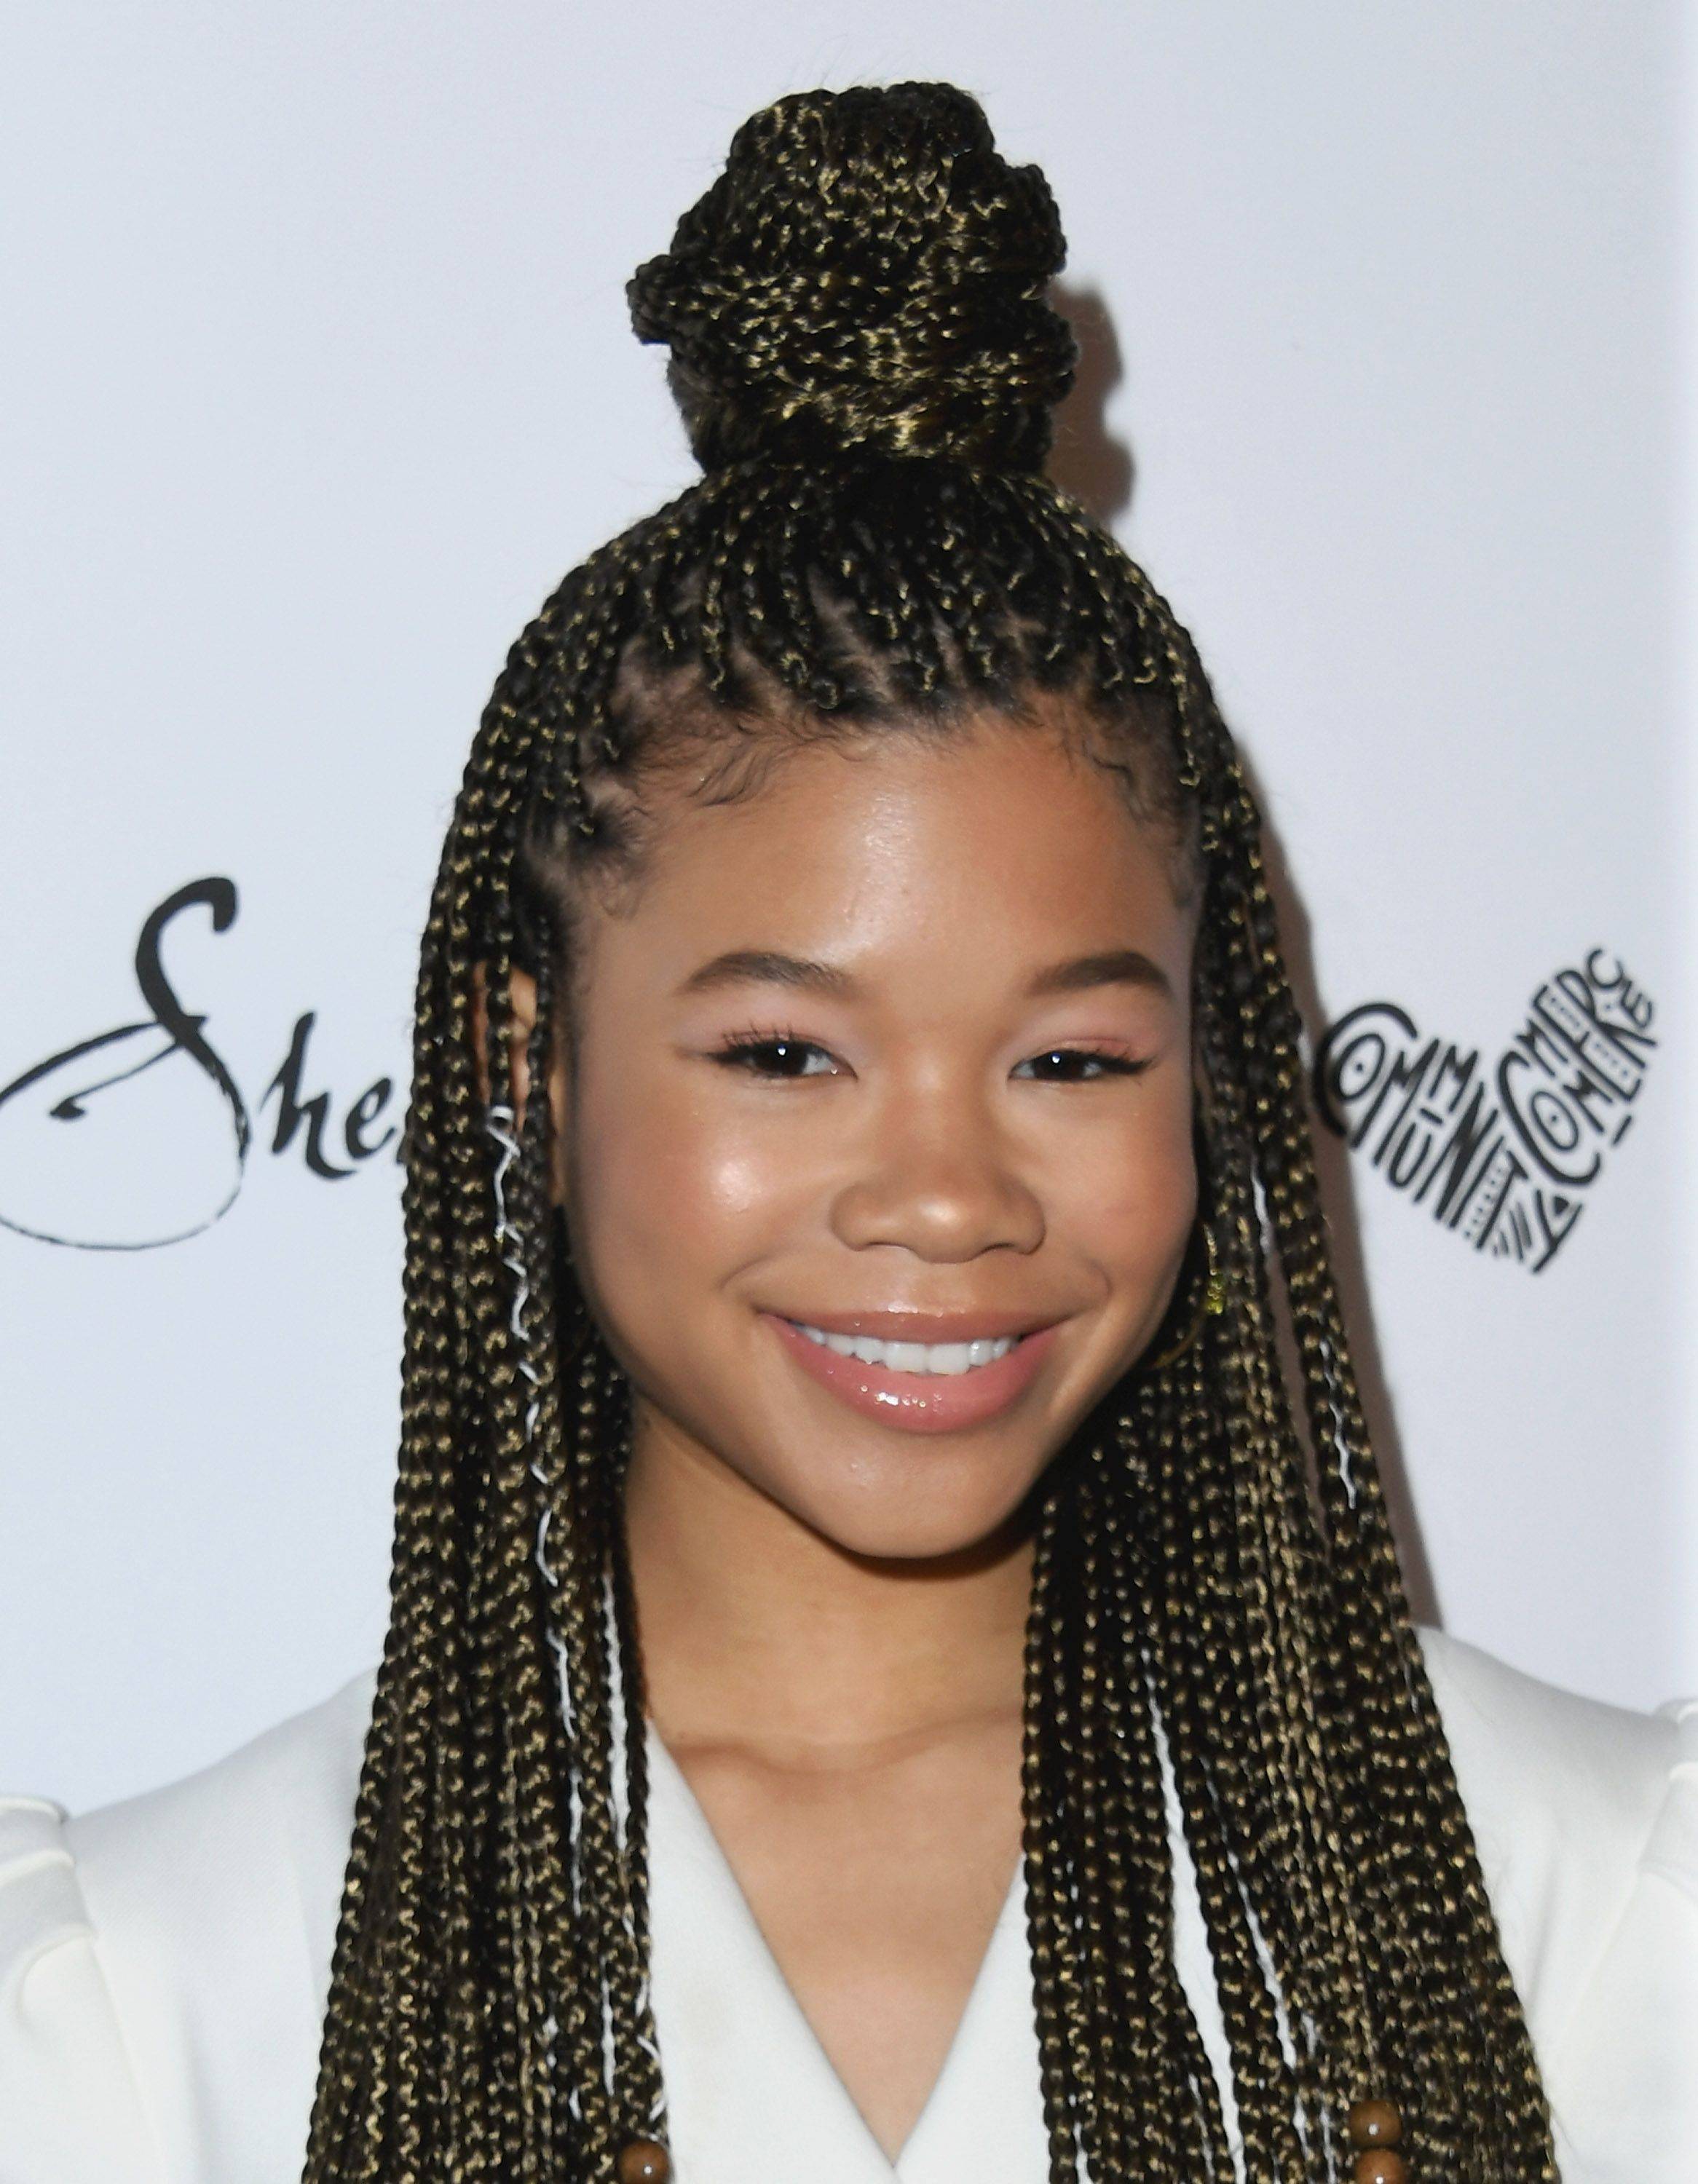 10 Stand-Out Ways to Part Your Box Braids